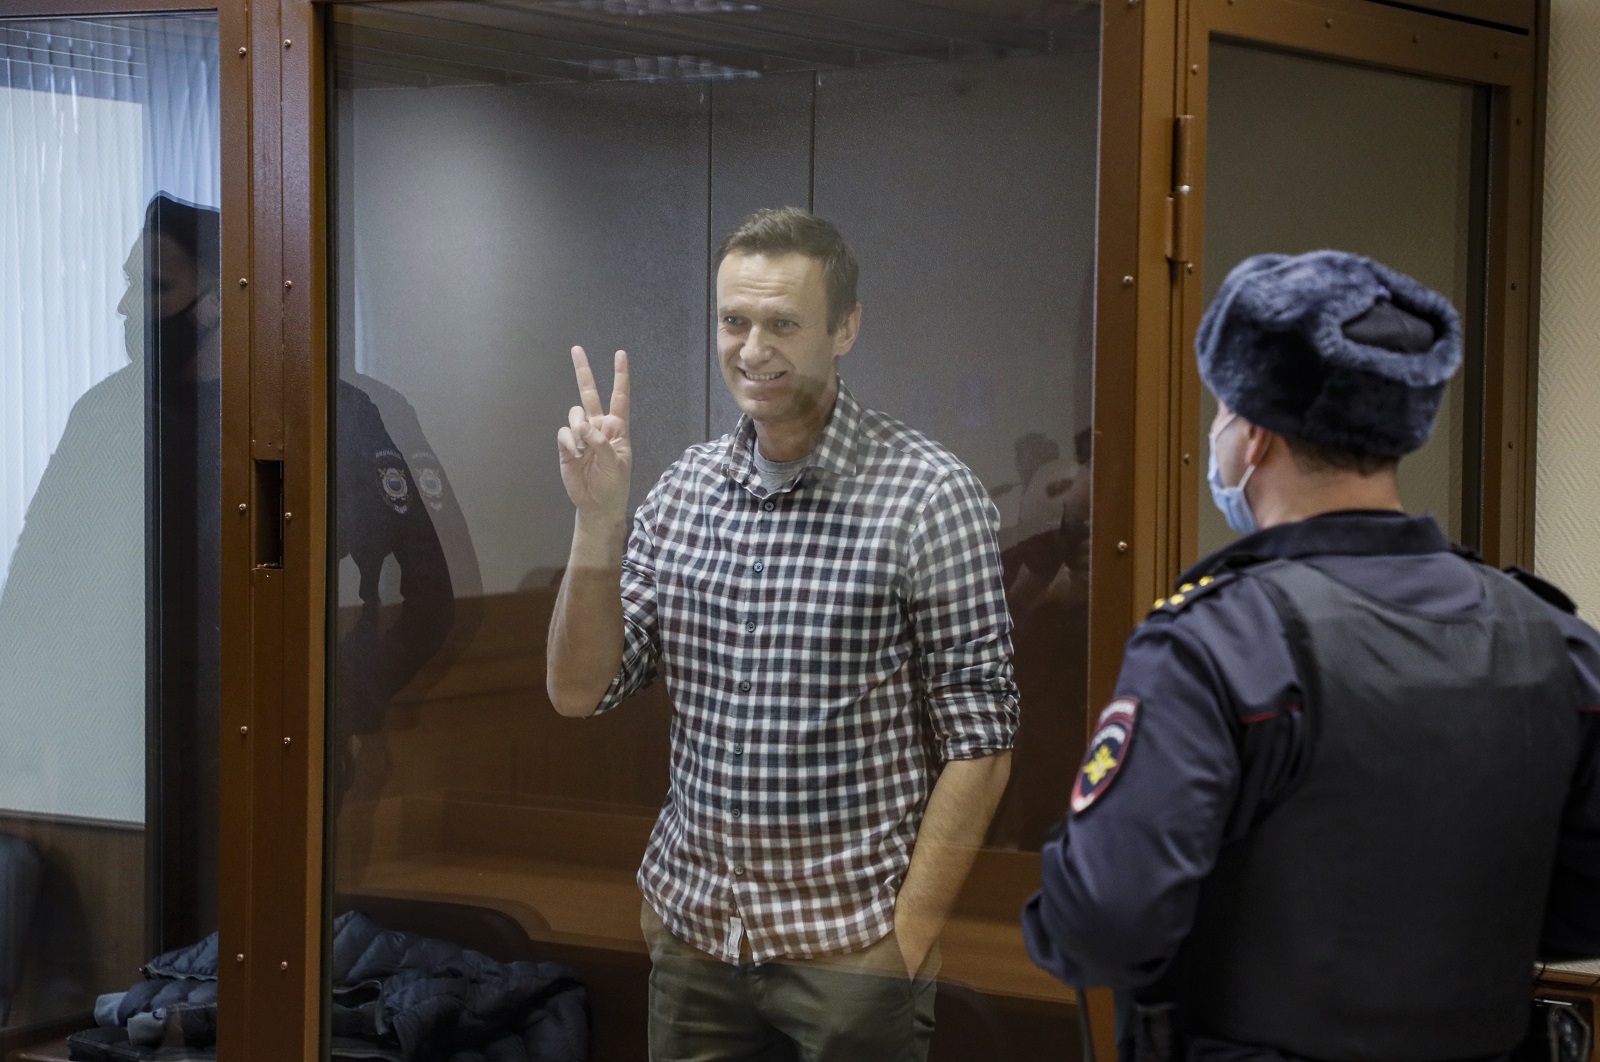 epaselect epa09025242 Russian opposition leader Alexei Navalny gestures inside a glass cage prior to a hearing at the Babushkinsky District Court in Moscow, Russia, 20 February 2021. The Moscow City court will hold a visiting session at the Babushkinsky District Court Building to consider Navalny's lawyers appeal against a court verdict issued on 02 February 2021, to replace the suspended sentence issued to Navalny in the Yves Rocher embezzlement case with an actual term in a penal colony.  EPA/YURI KOCHETKOV MANDATORY CREDIT